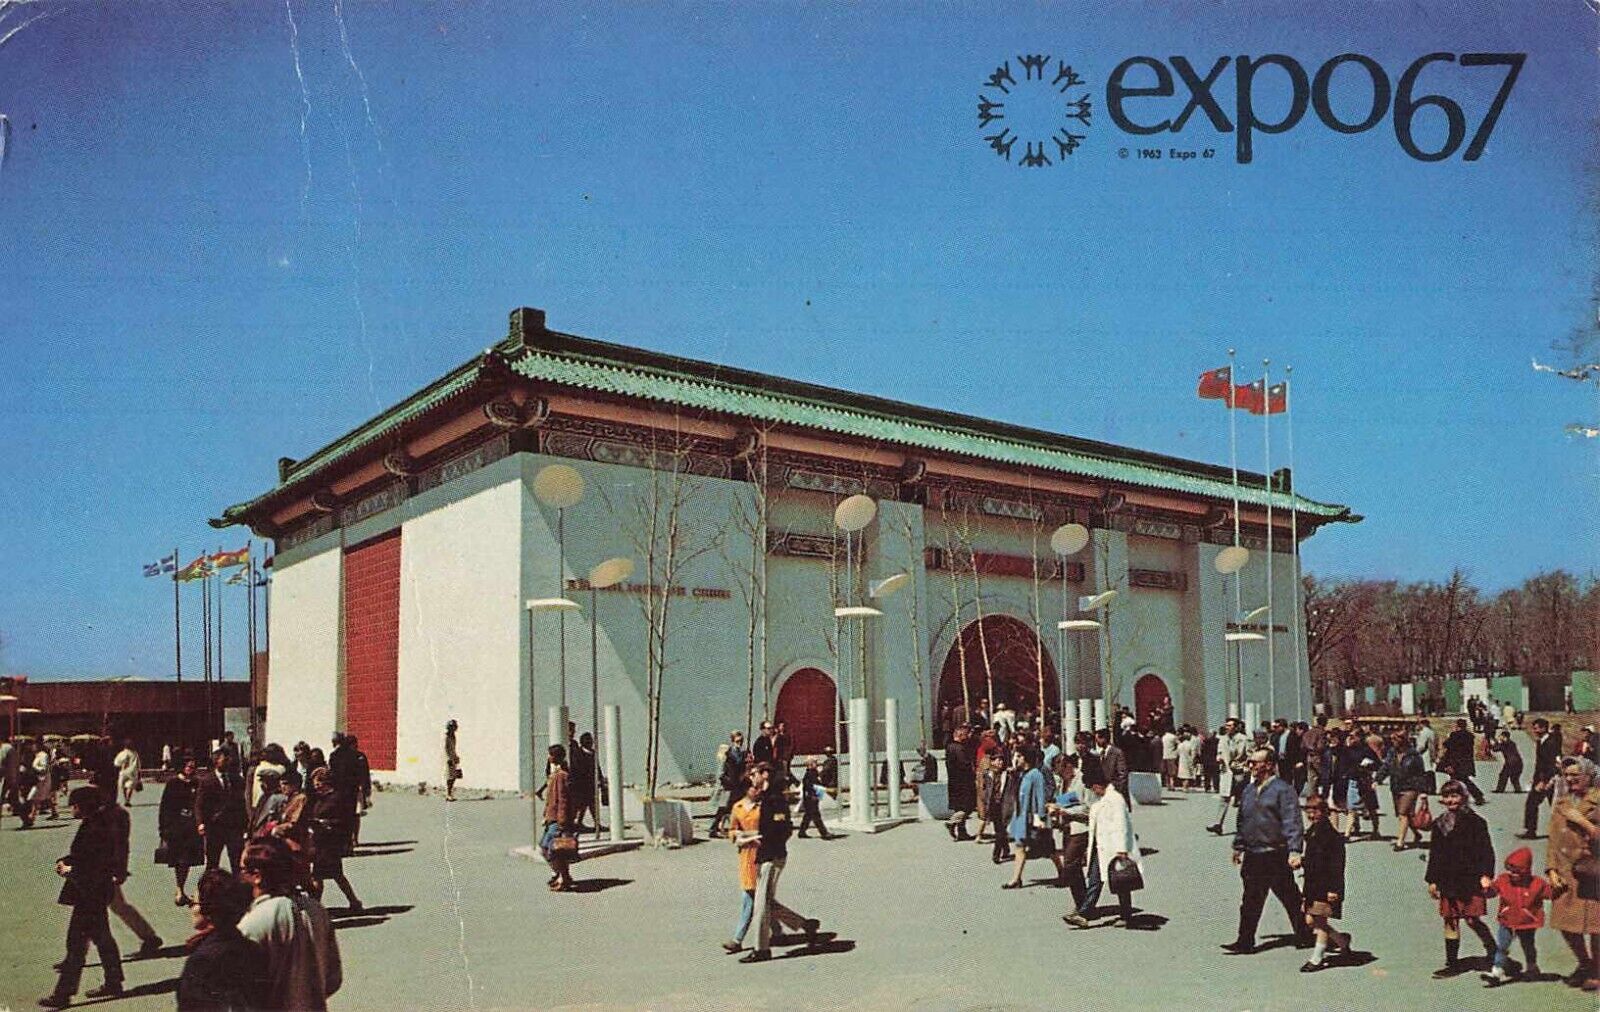 Postcard Vintage 1967 Candian Expo67 Montreal Posted 